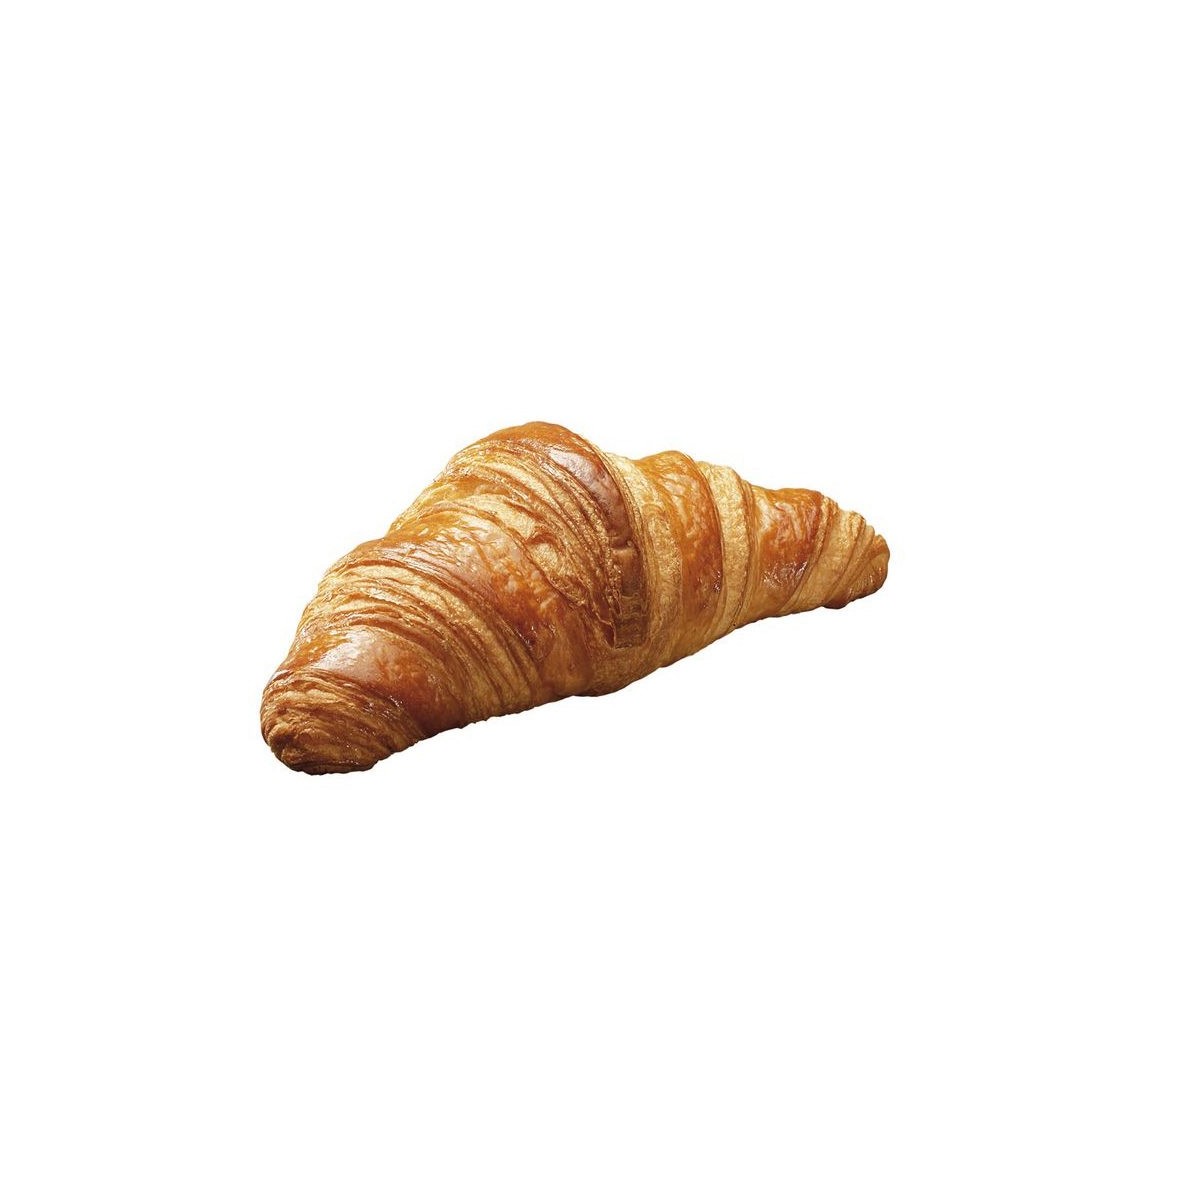 GELFIN' OR K157 CROISSANT  STRAIGHT BUTTER RAW 168X65GR  BOX